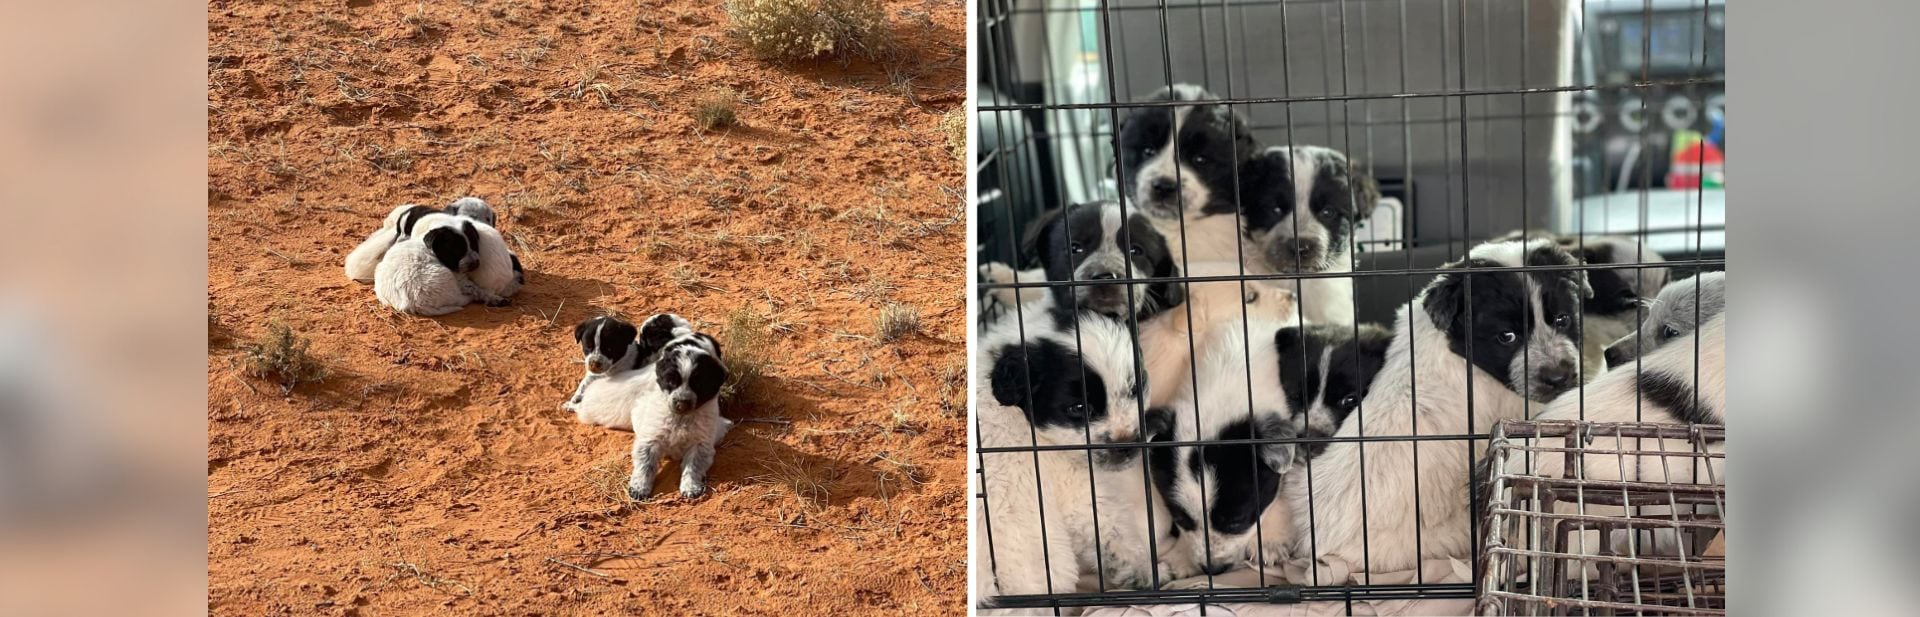 Arizona Woman Spots What She Thinks is a Pile of Fluff, Ends Up Rescuing 13 Puppies